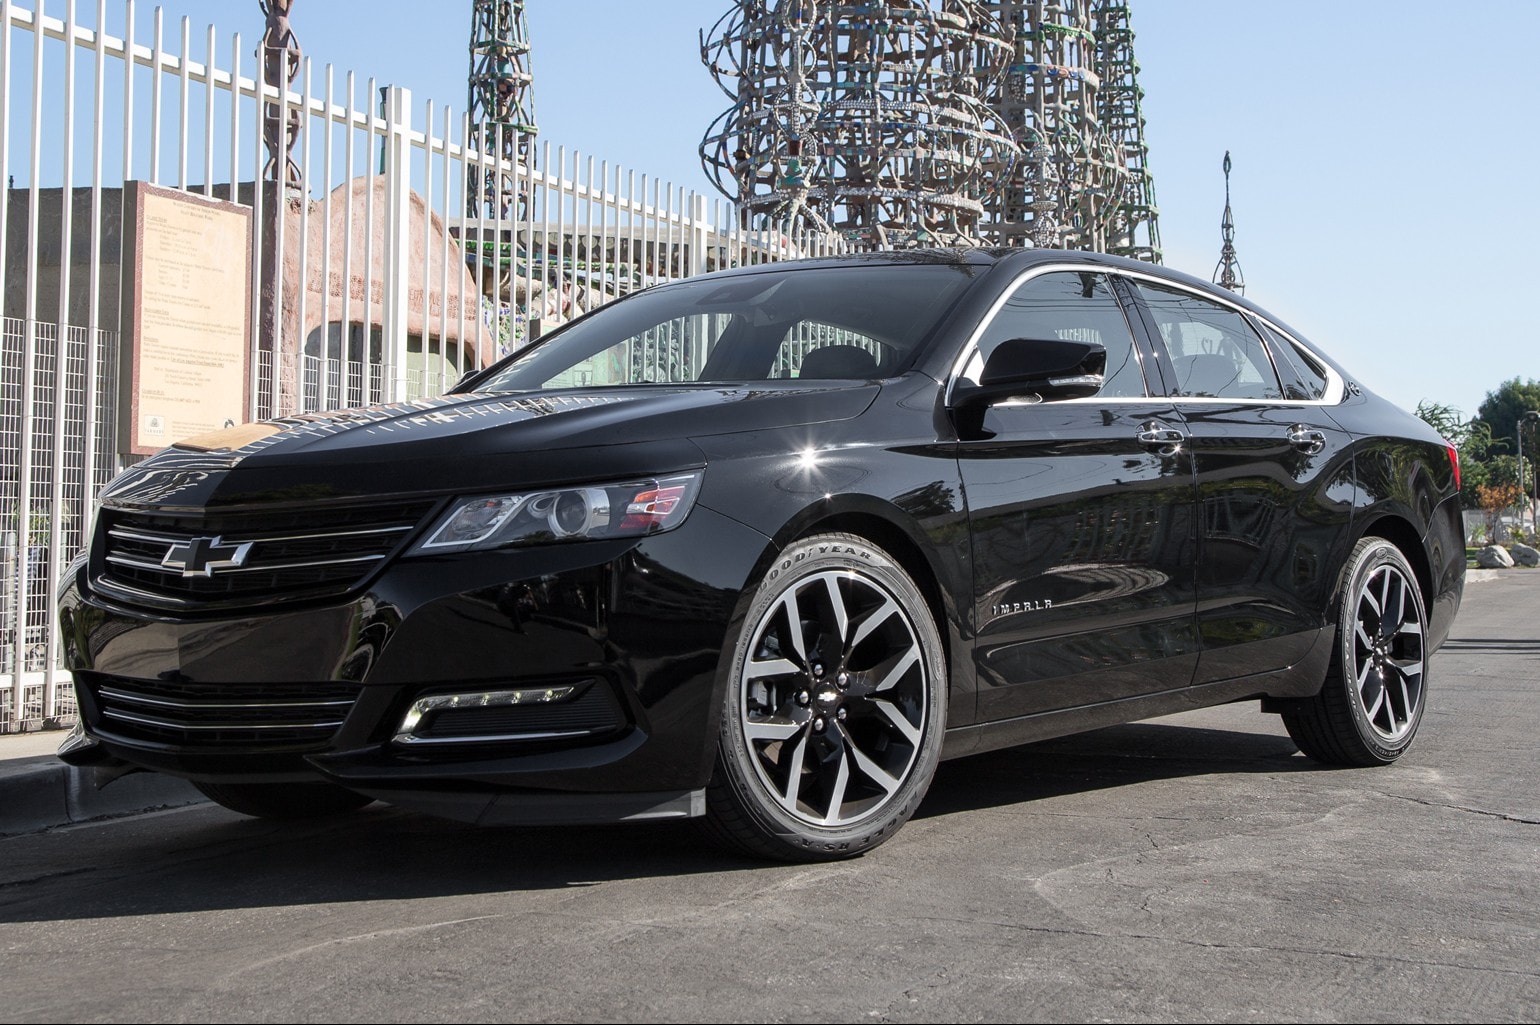 Leaping Back in Time with a 2016 Chevrolet Impala